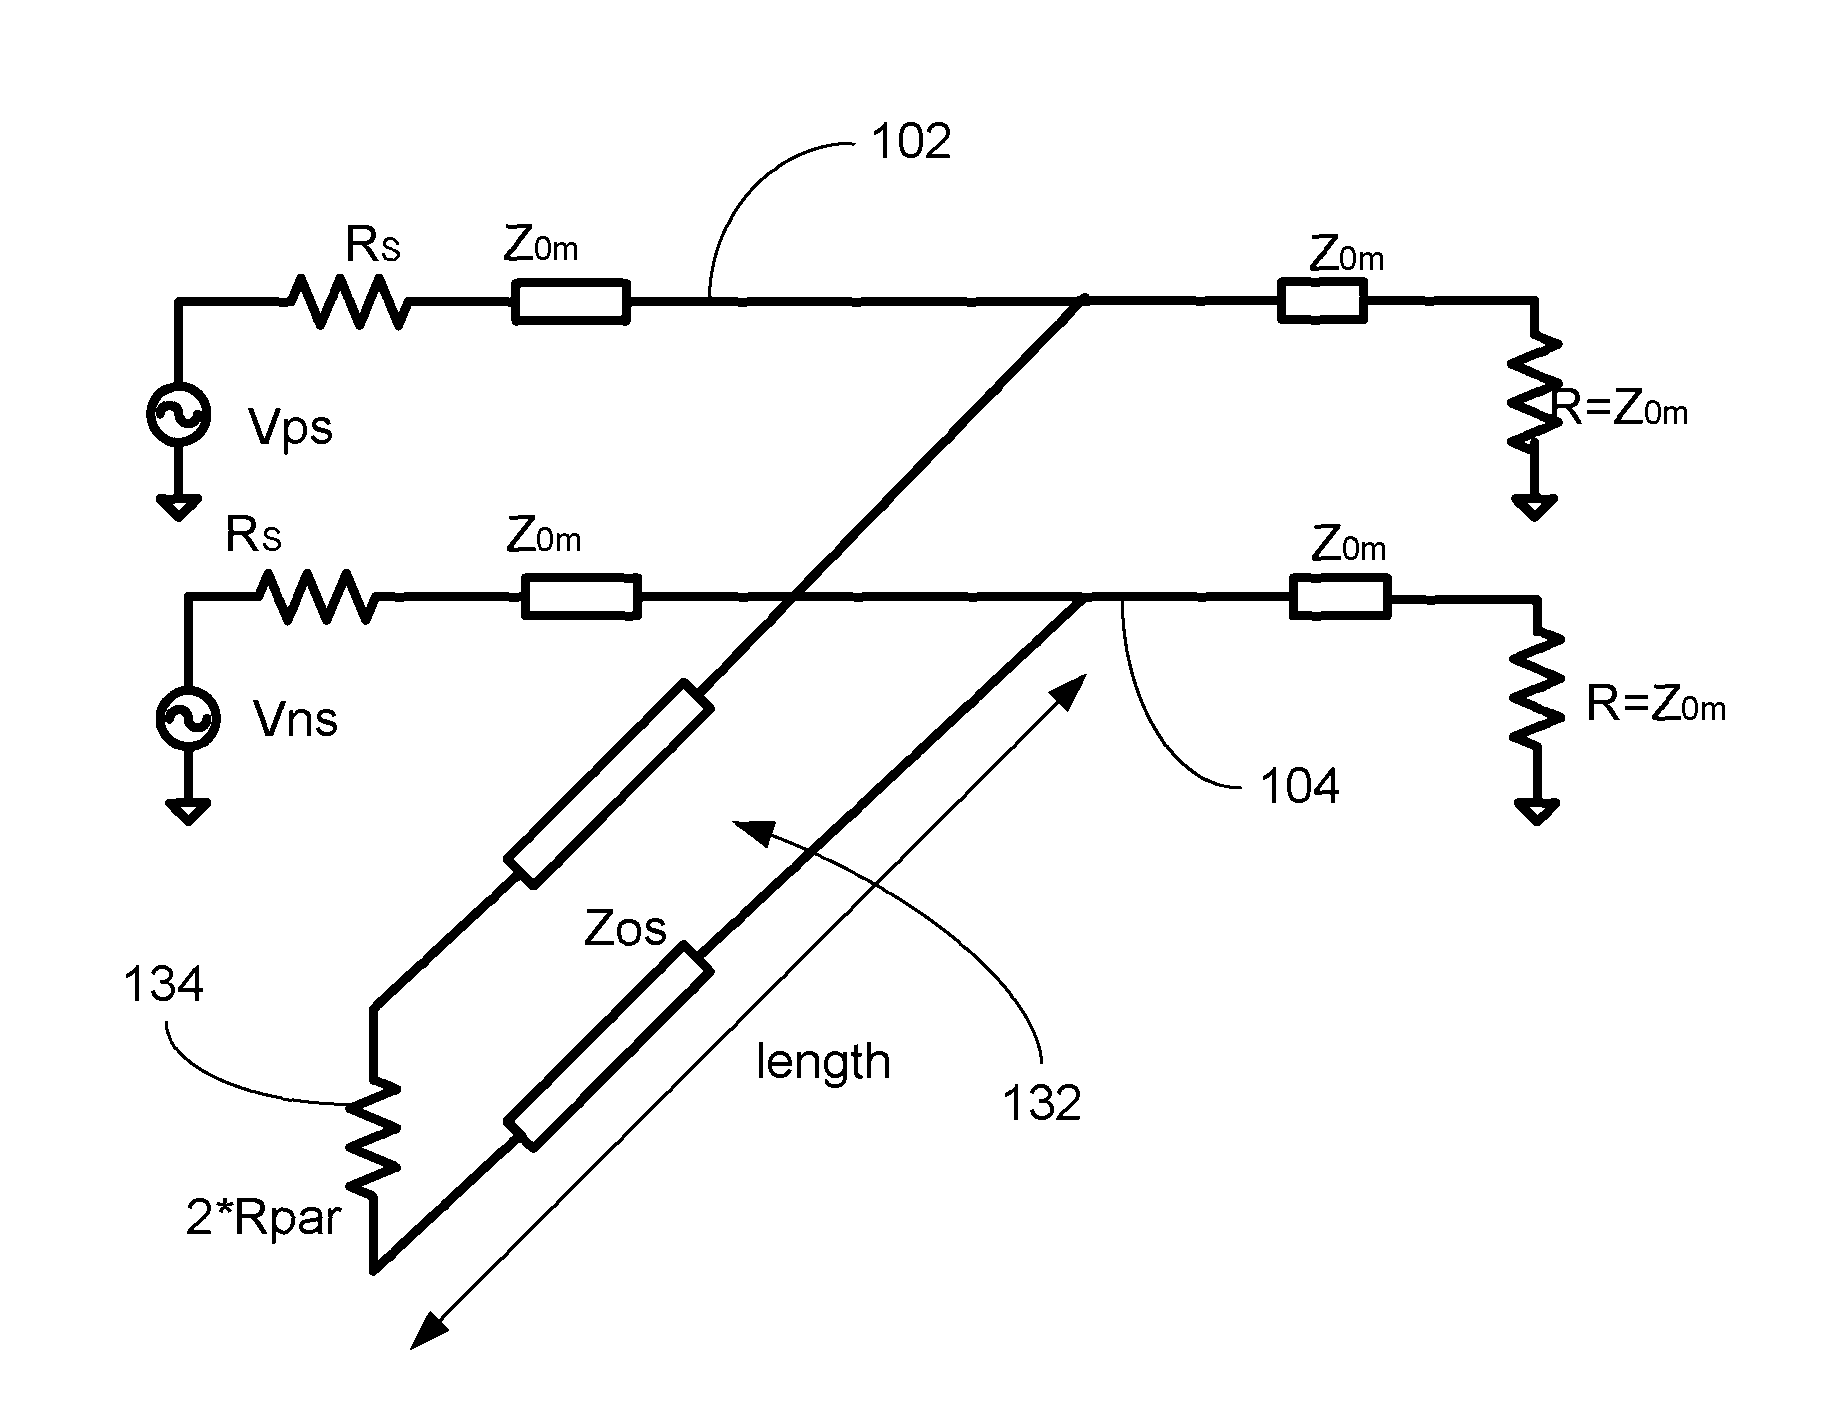 Loaded parallel stub common mode filter for differential lines carrying high rate digital signals